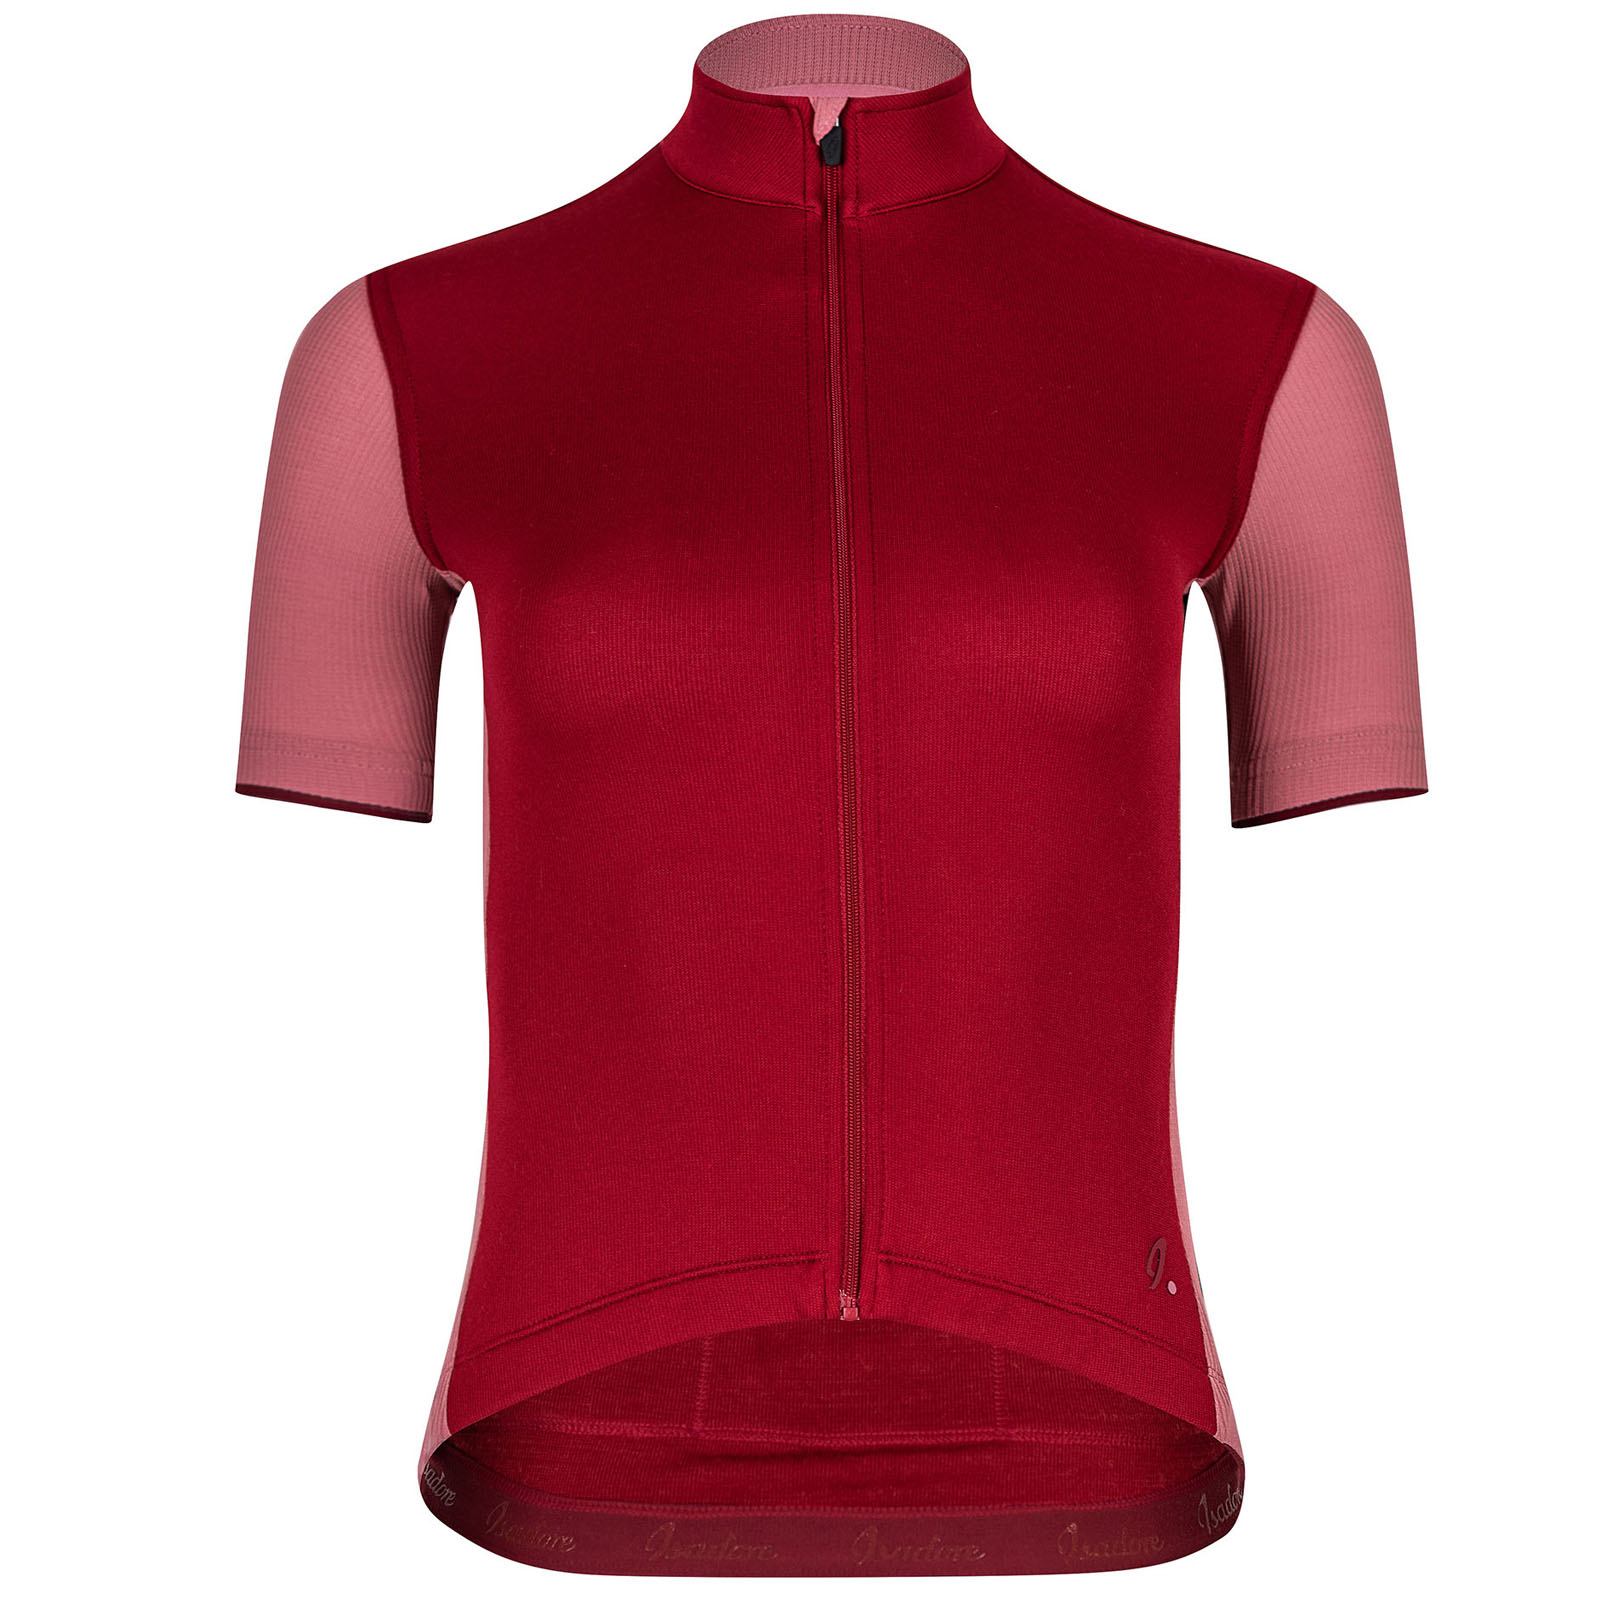 Image of Isadore Signature Women's Cycling Jersey - Rio Red/Mesa Rose